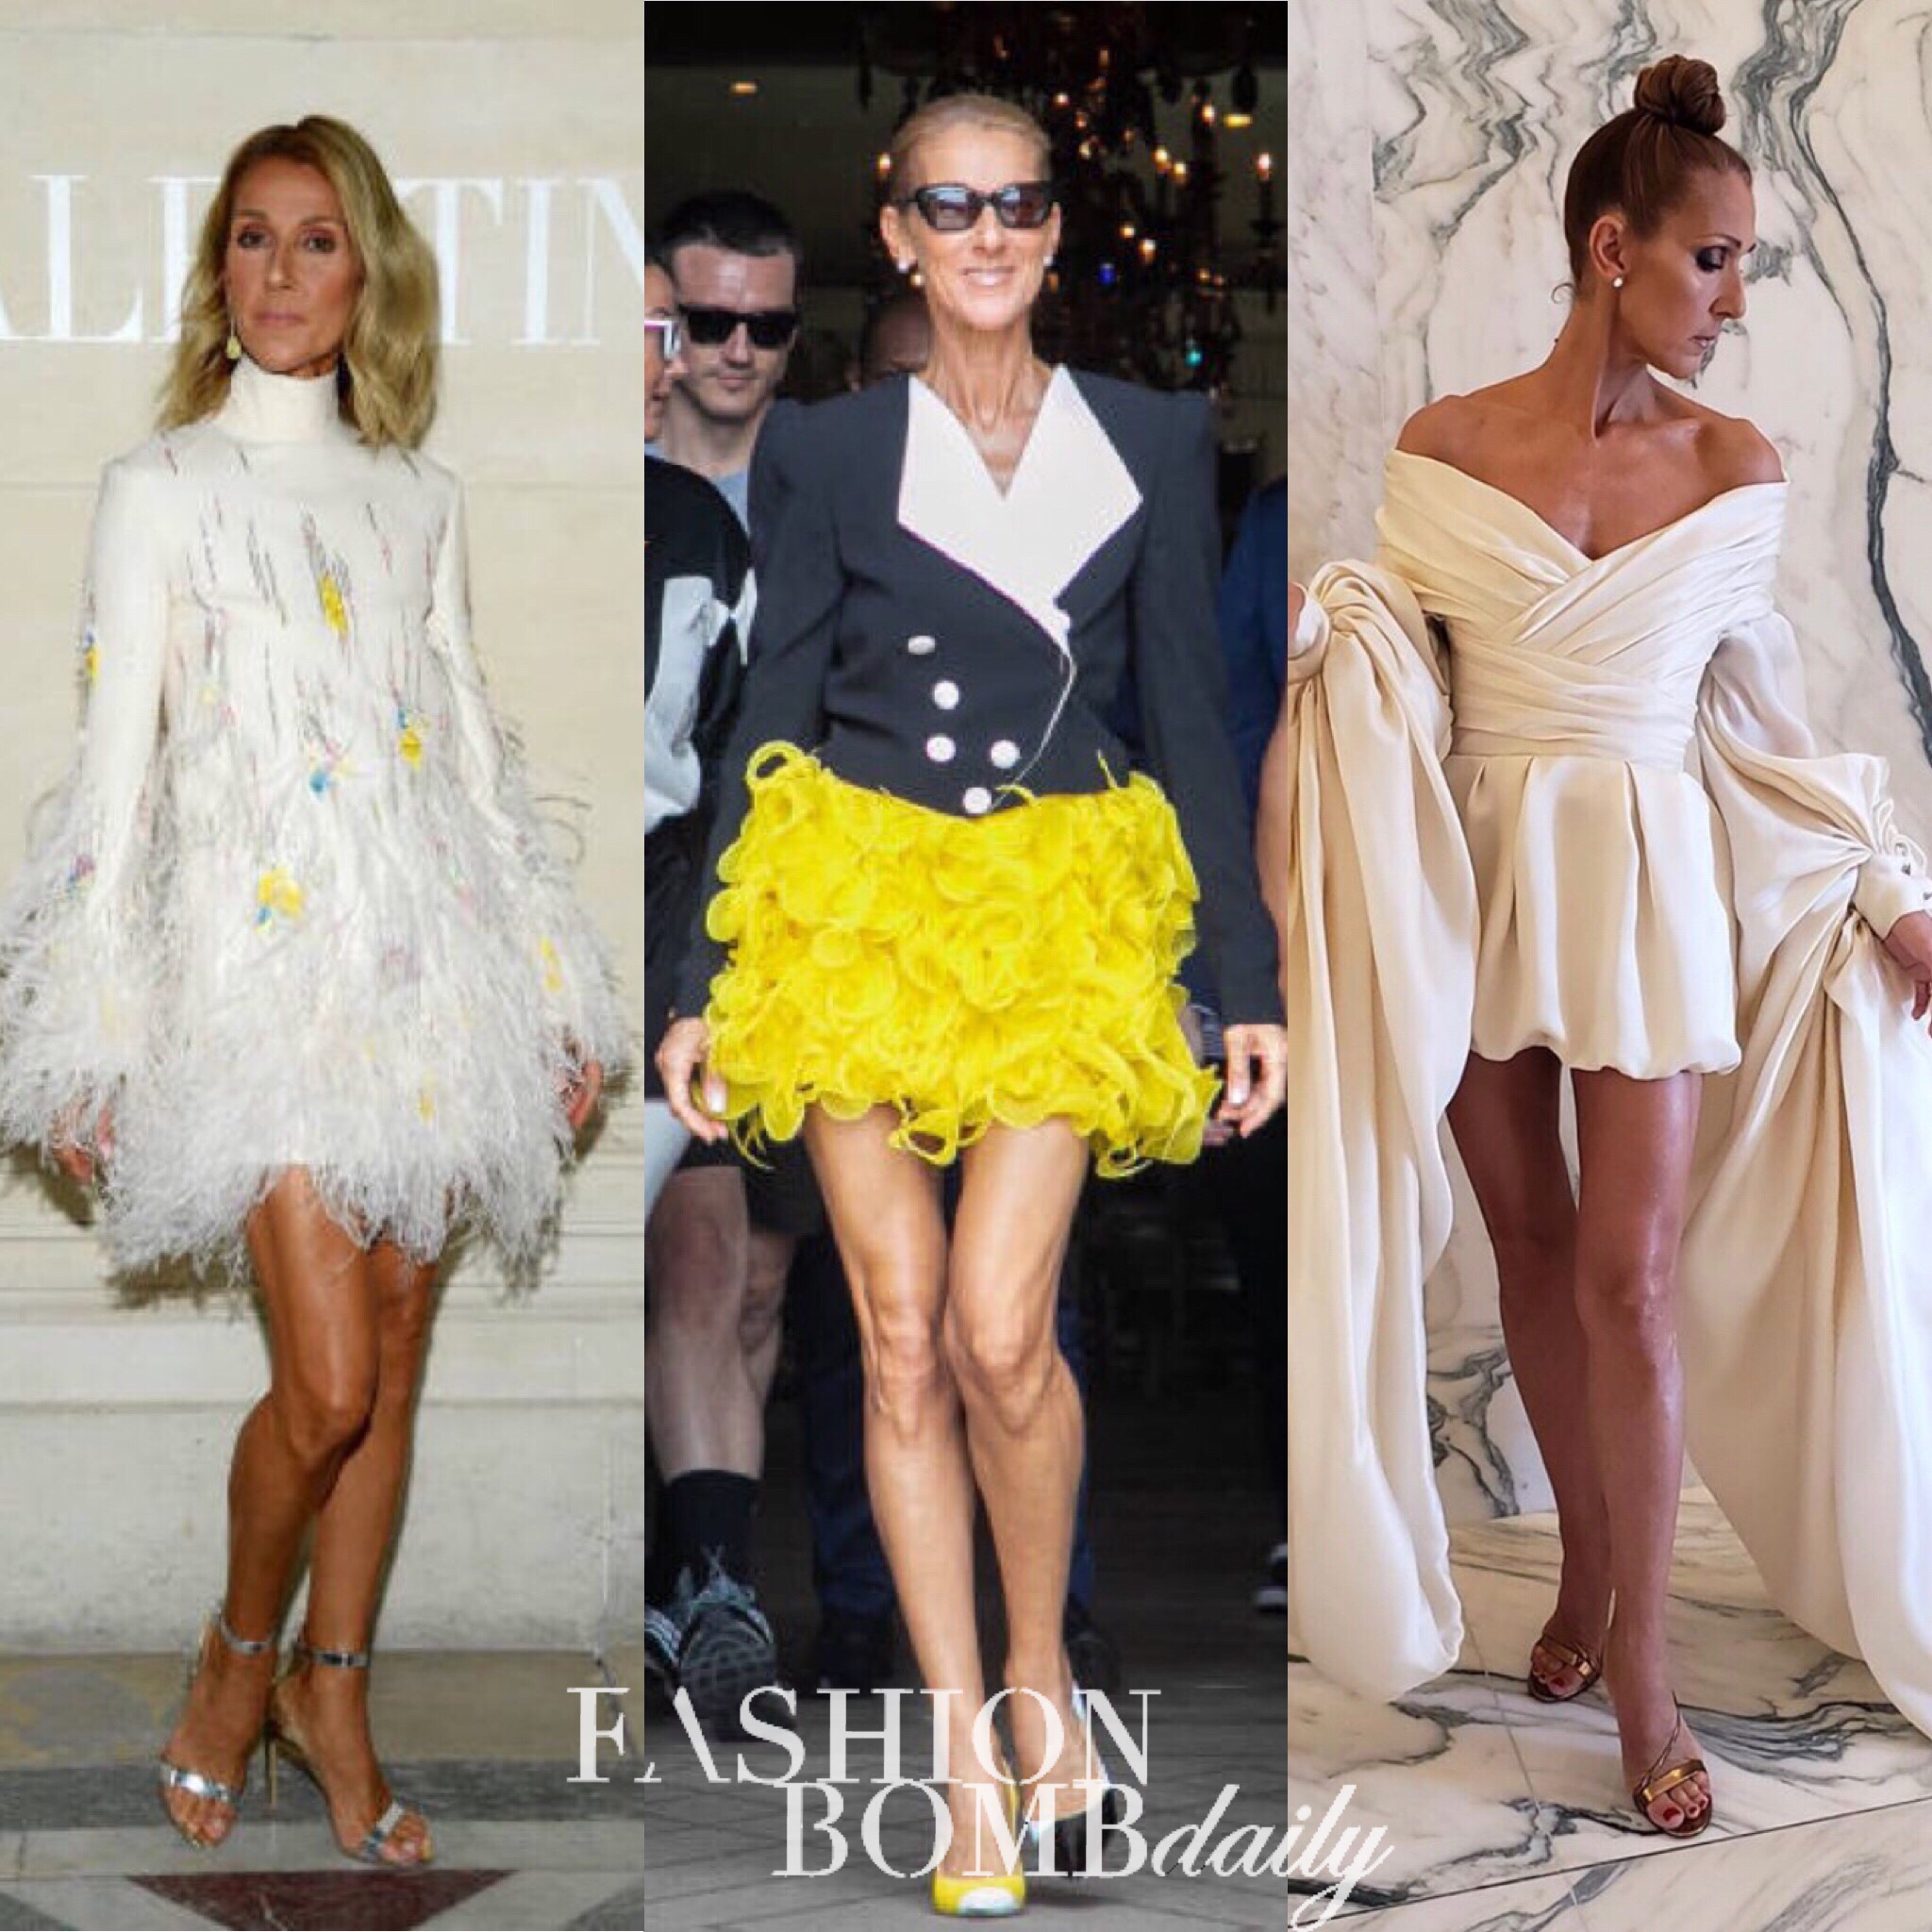 Celine Dion Style: Celine Dion's Best Outfits